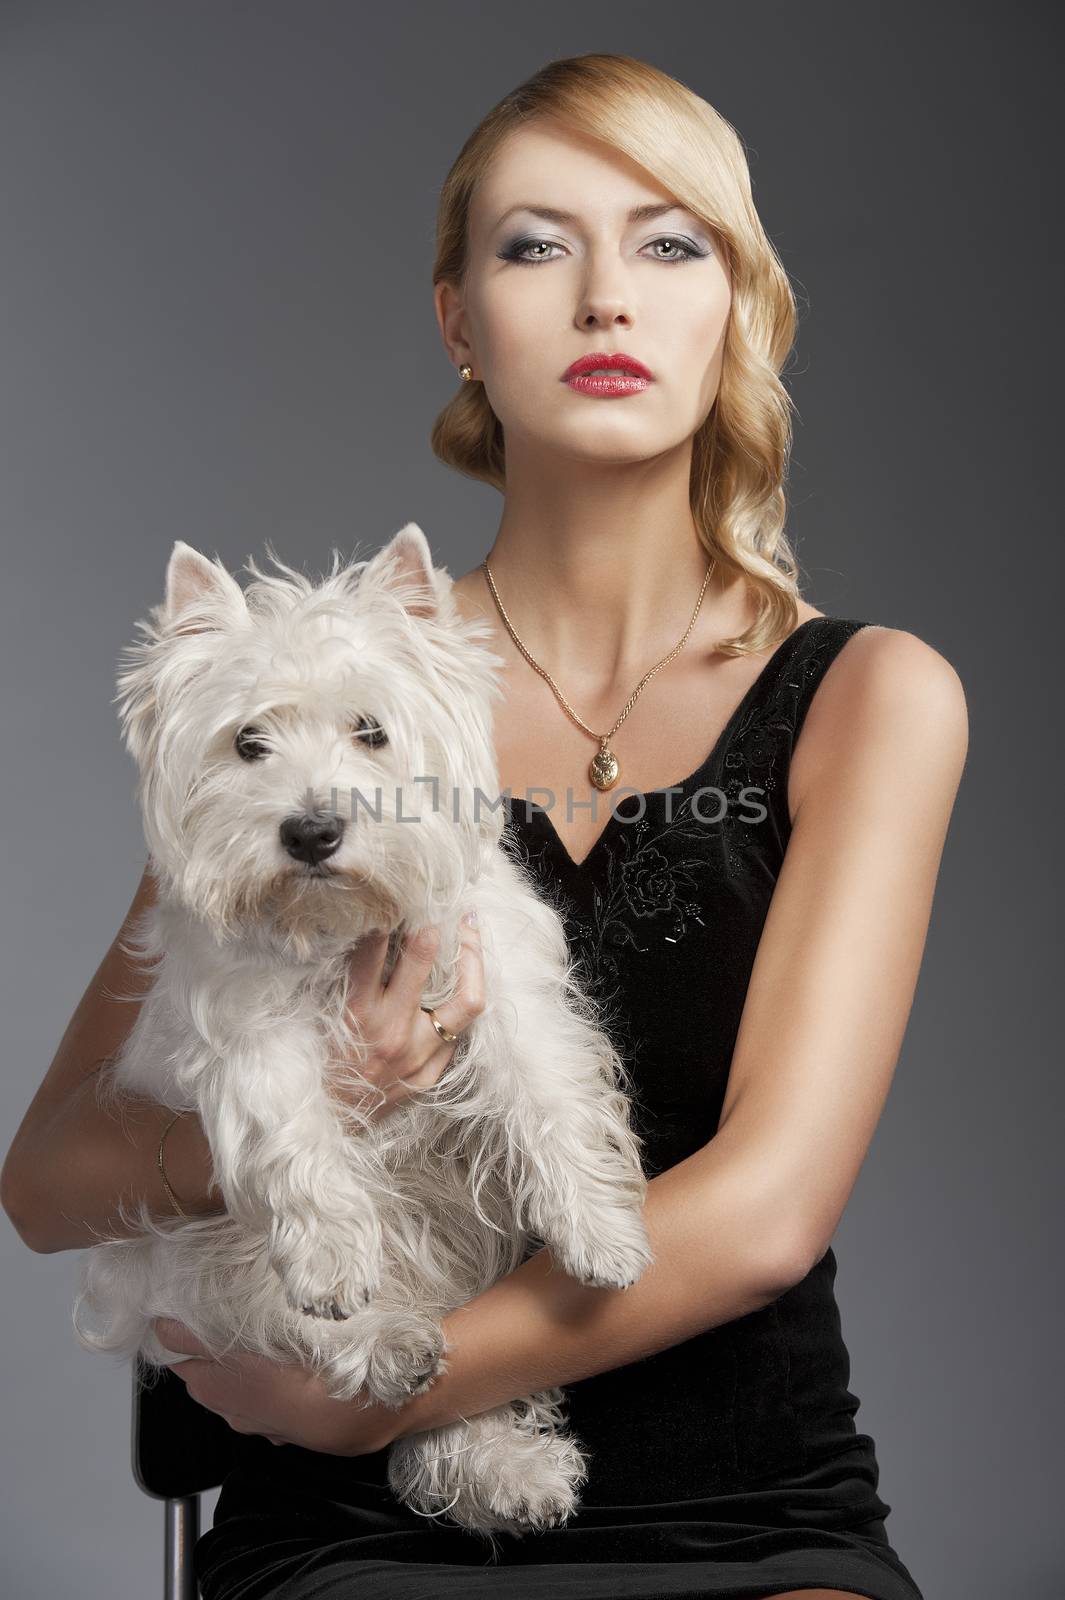 young elegant blond woman wearing black dress with an old fashion hairtyle and necklace jewellery, she is in front of the camera, takes a dog in her arms and looks in to the lens